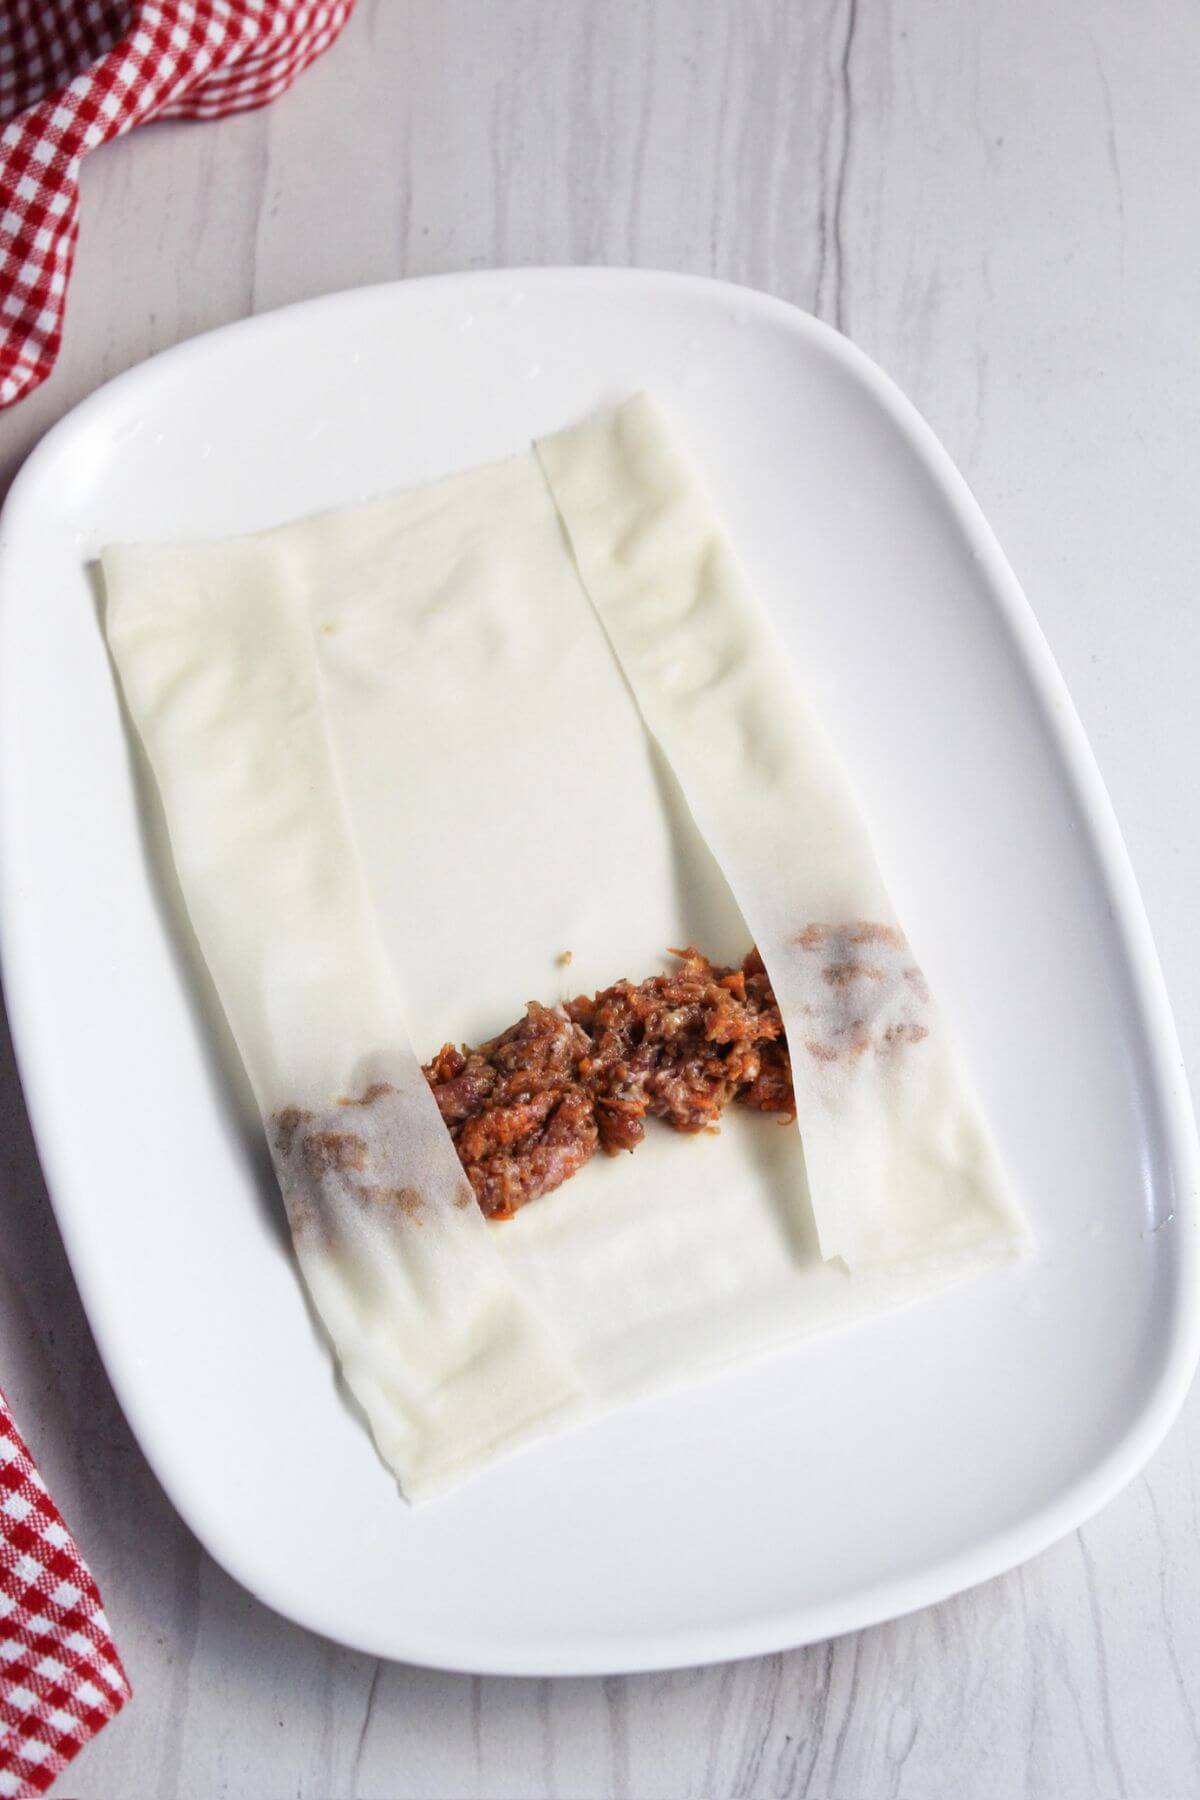 Folding lumpia wrapper over meat mixture.